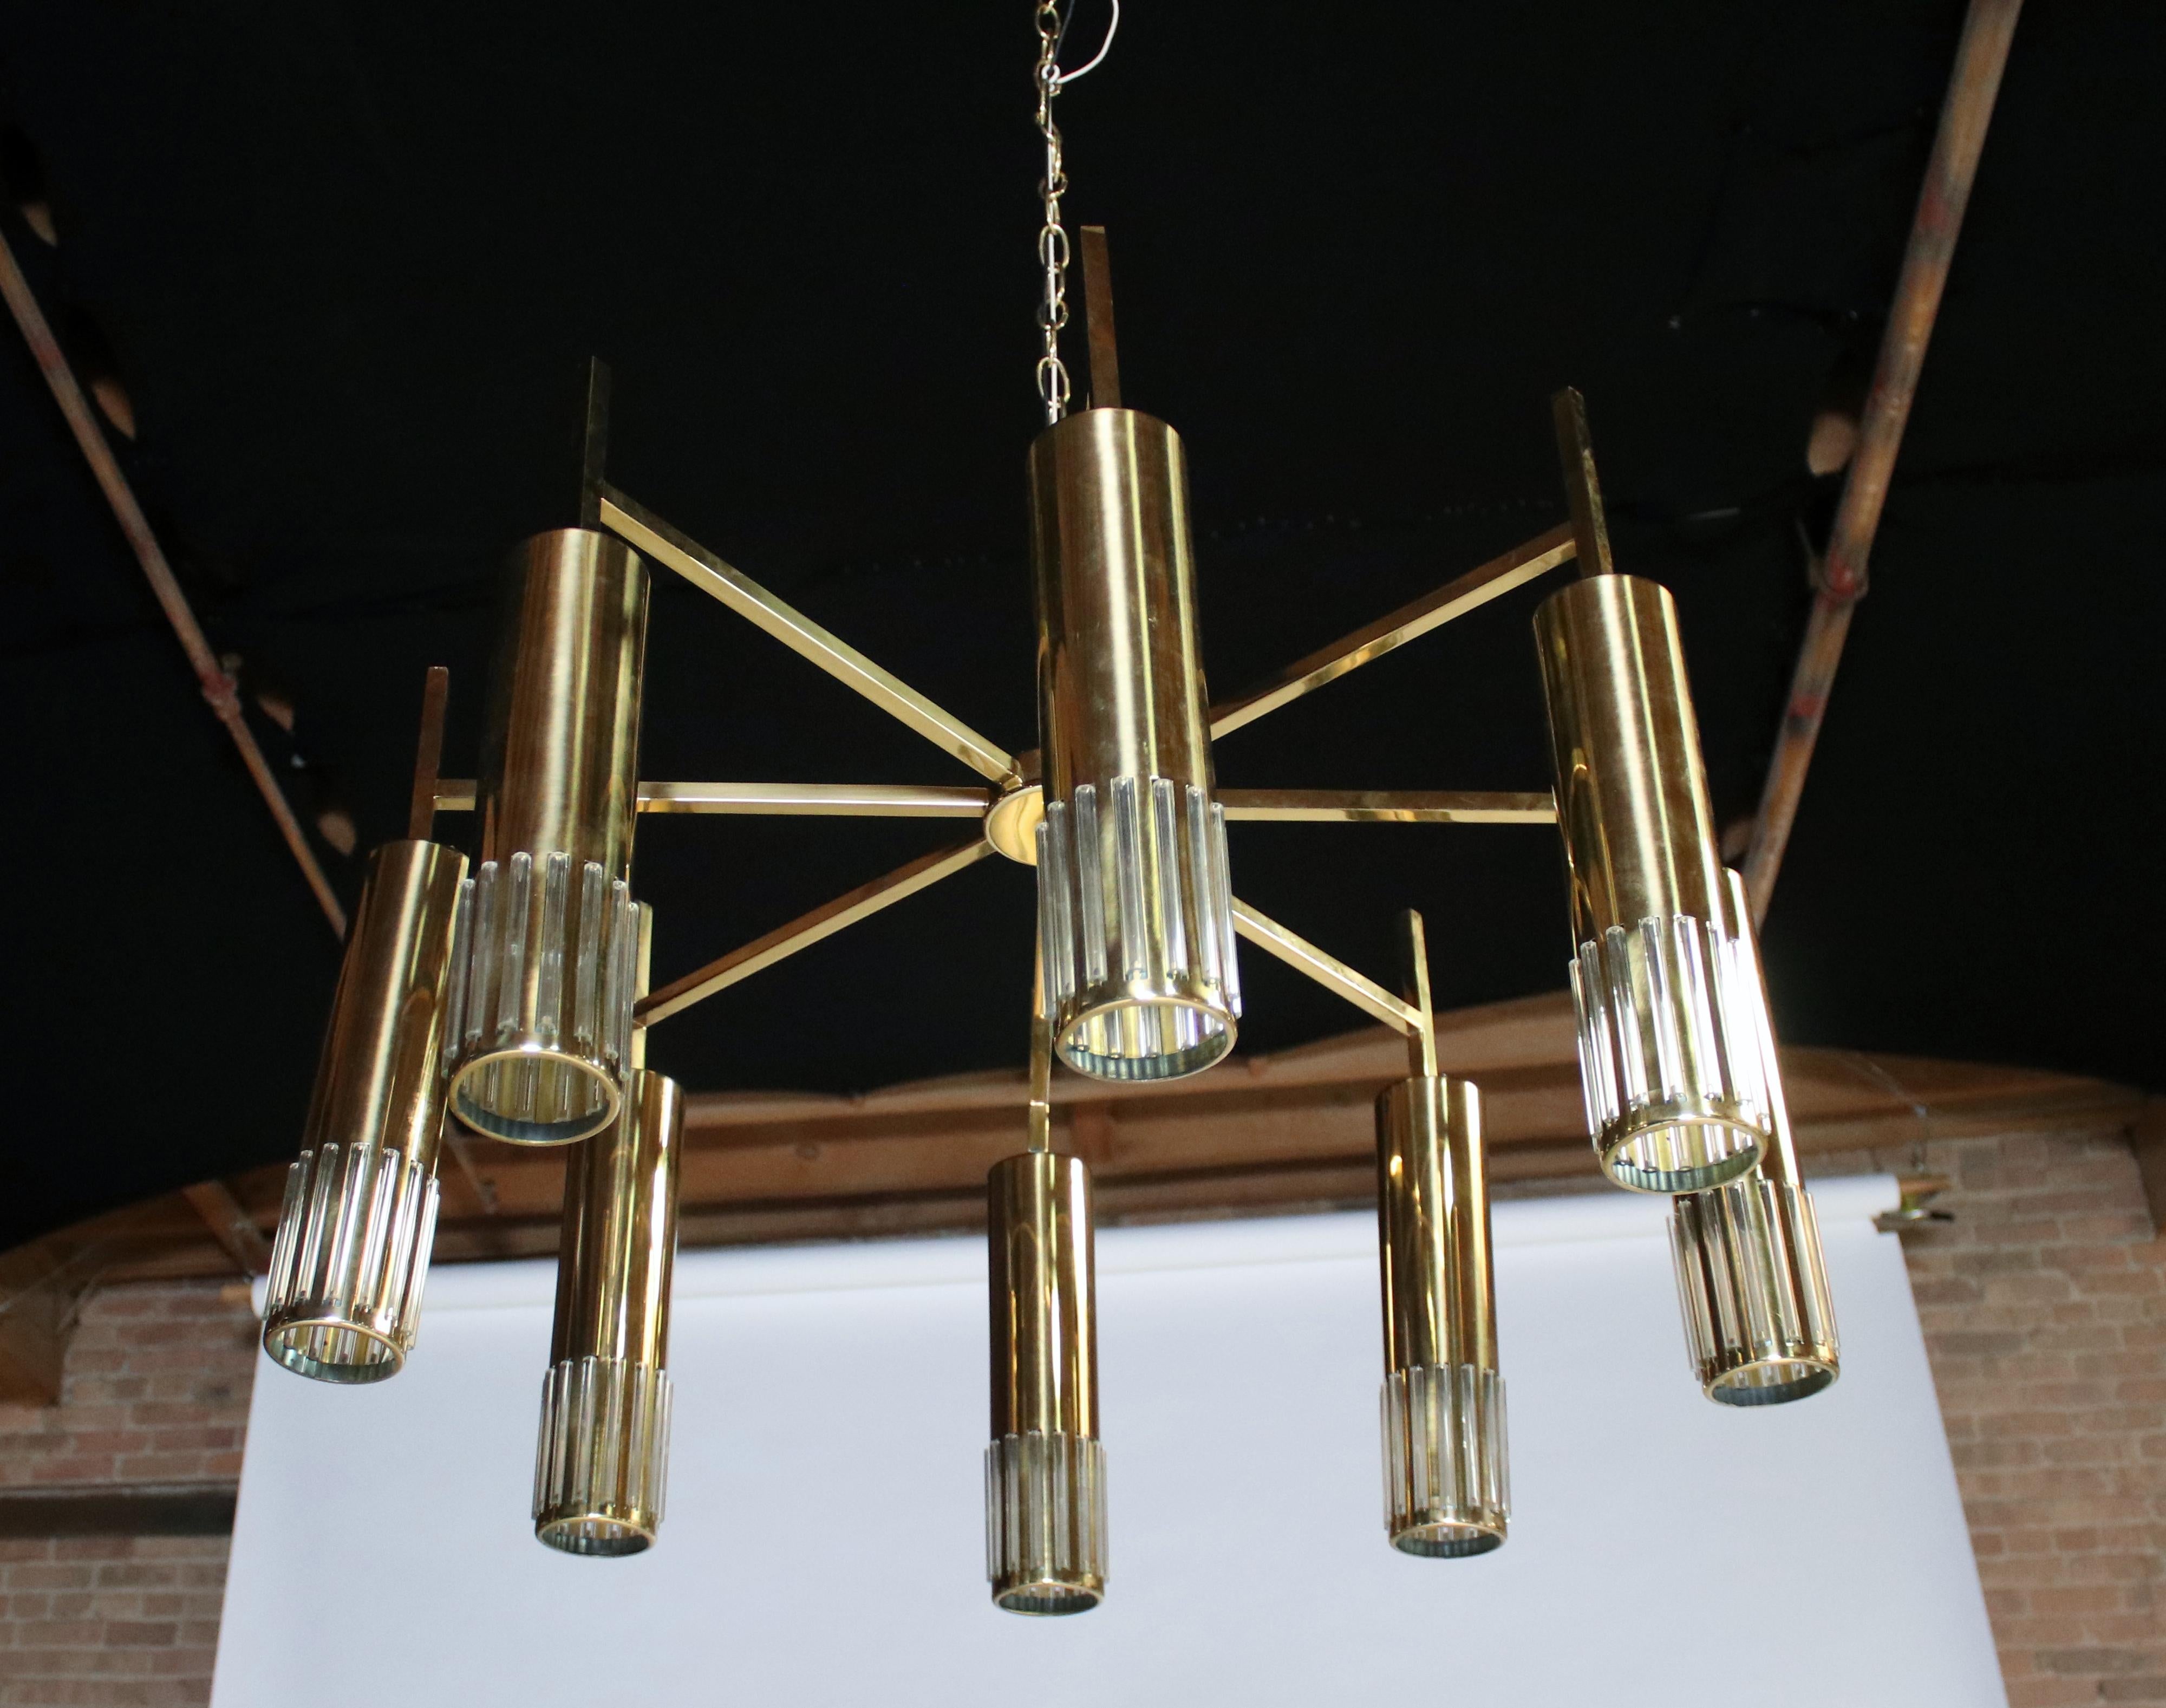 Midcentury brass chandelier or semi flush mount fixture by Lightolier. Features 8 arms and removable hanging brass and Lucite pendants. Cord is 22